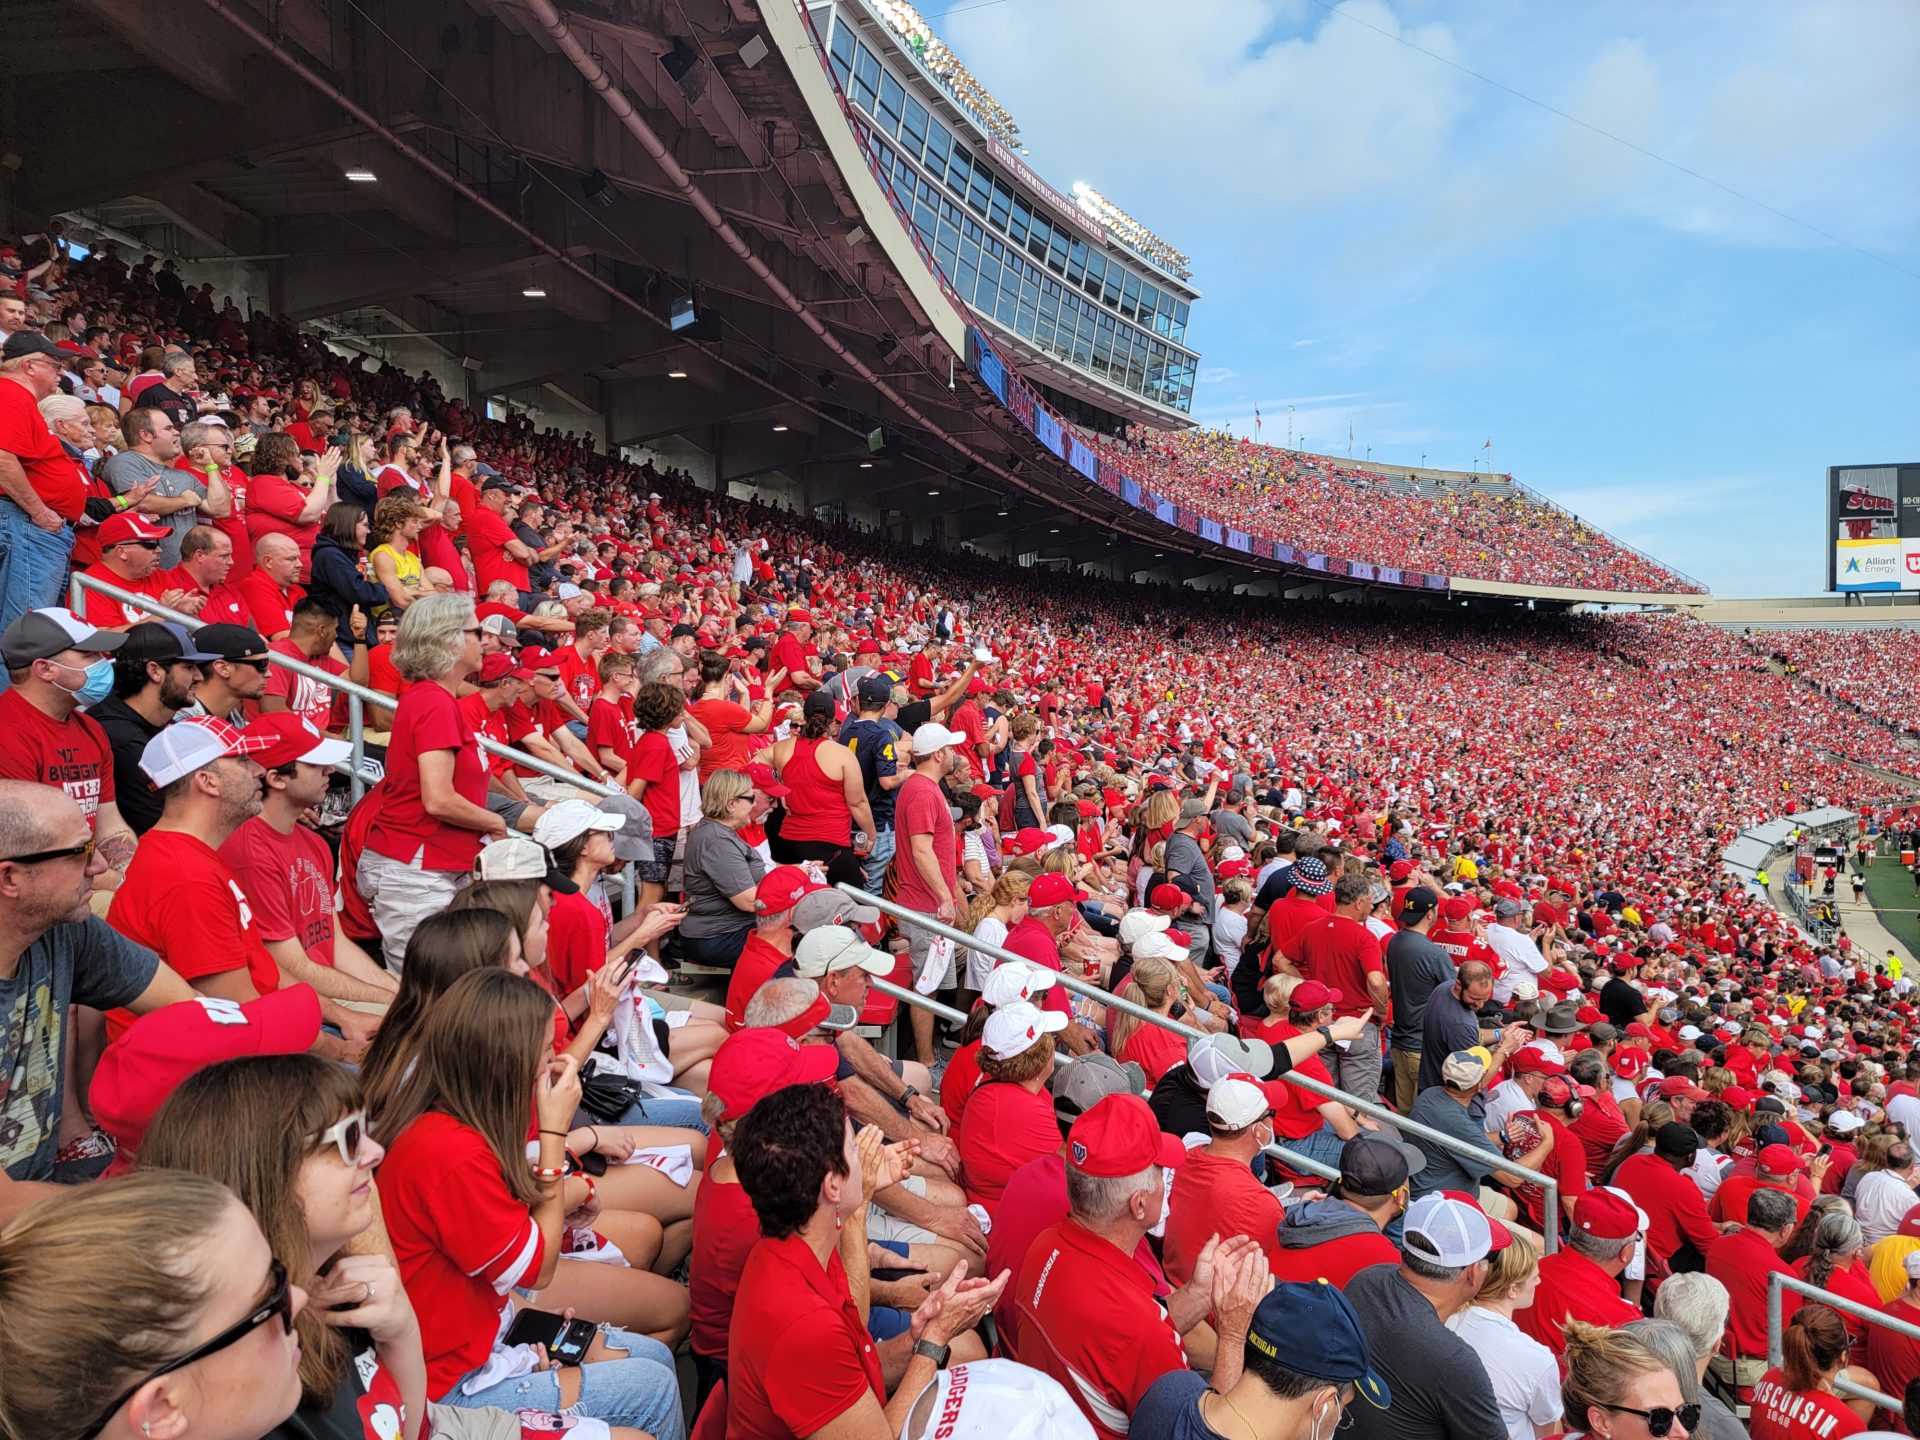 a crowd of people in red shirts in a stadium